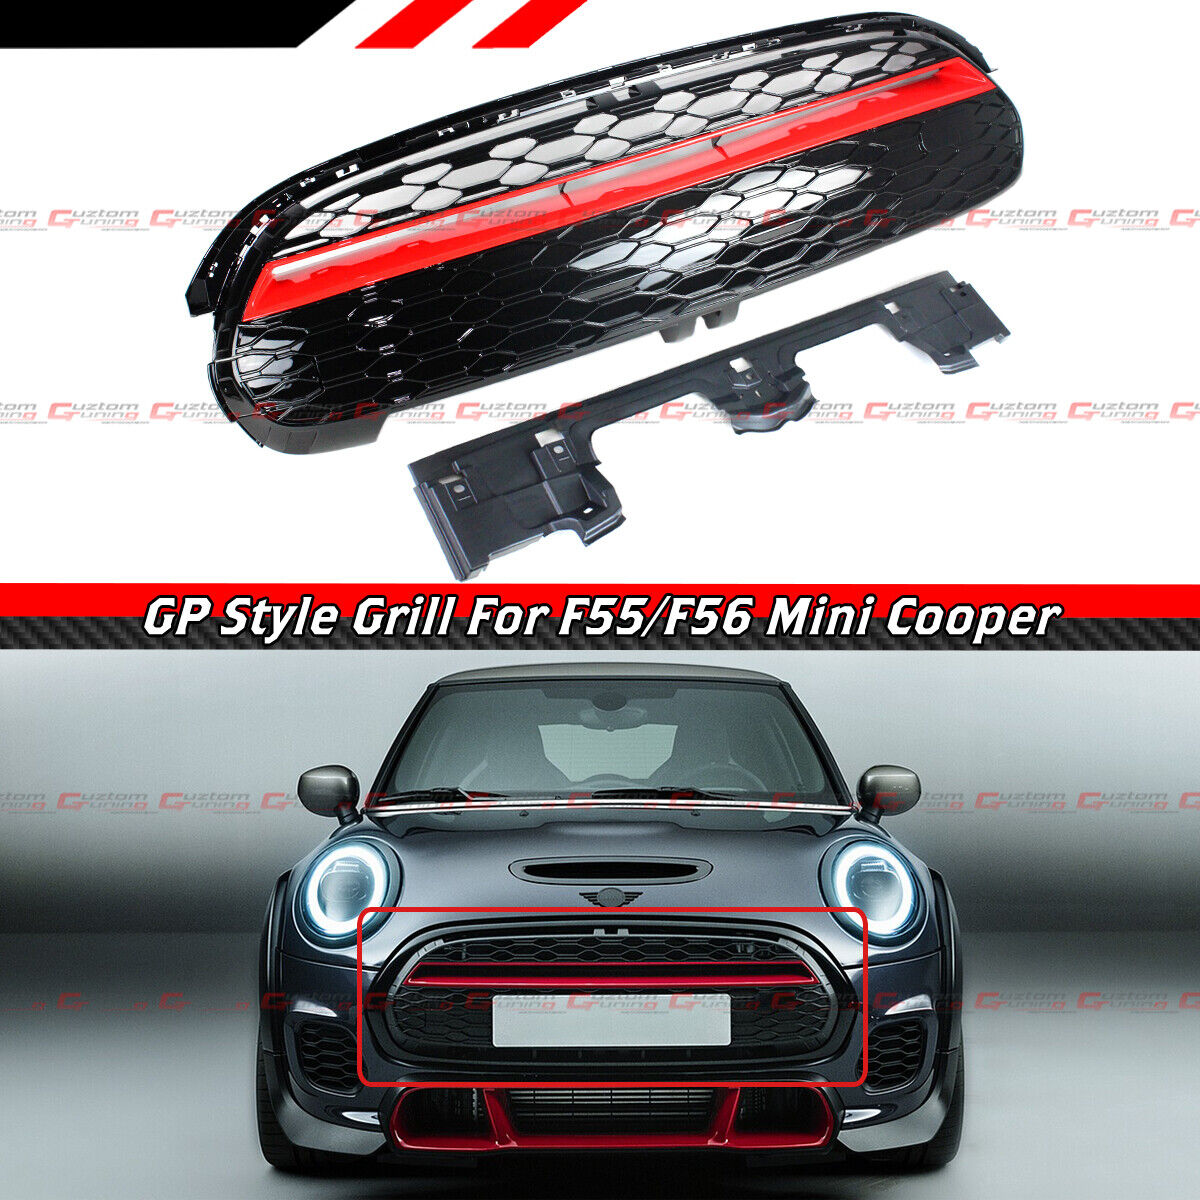 FOR 2014-2021 MINI COOPER F55 F56 F57 GP STYLE GLOSS BLACK RED TRIM FRONT GRILLE